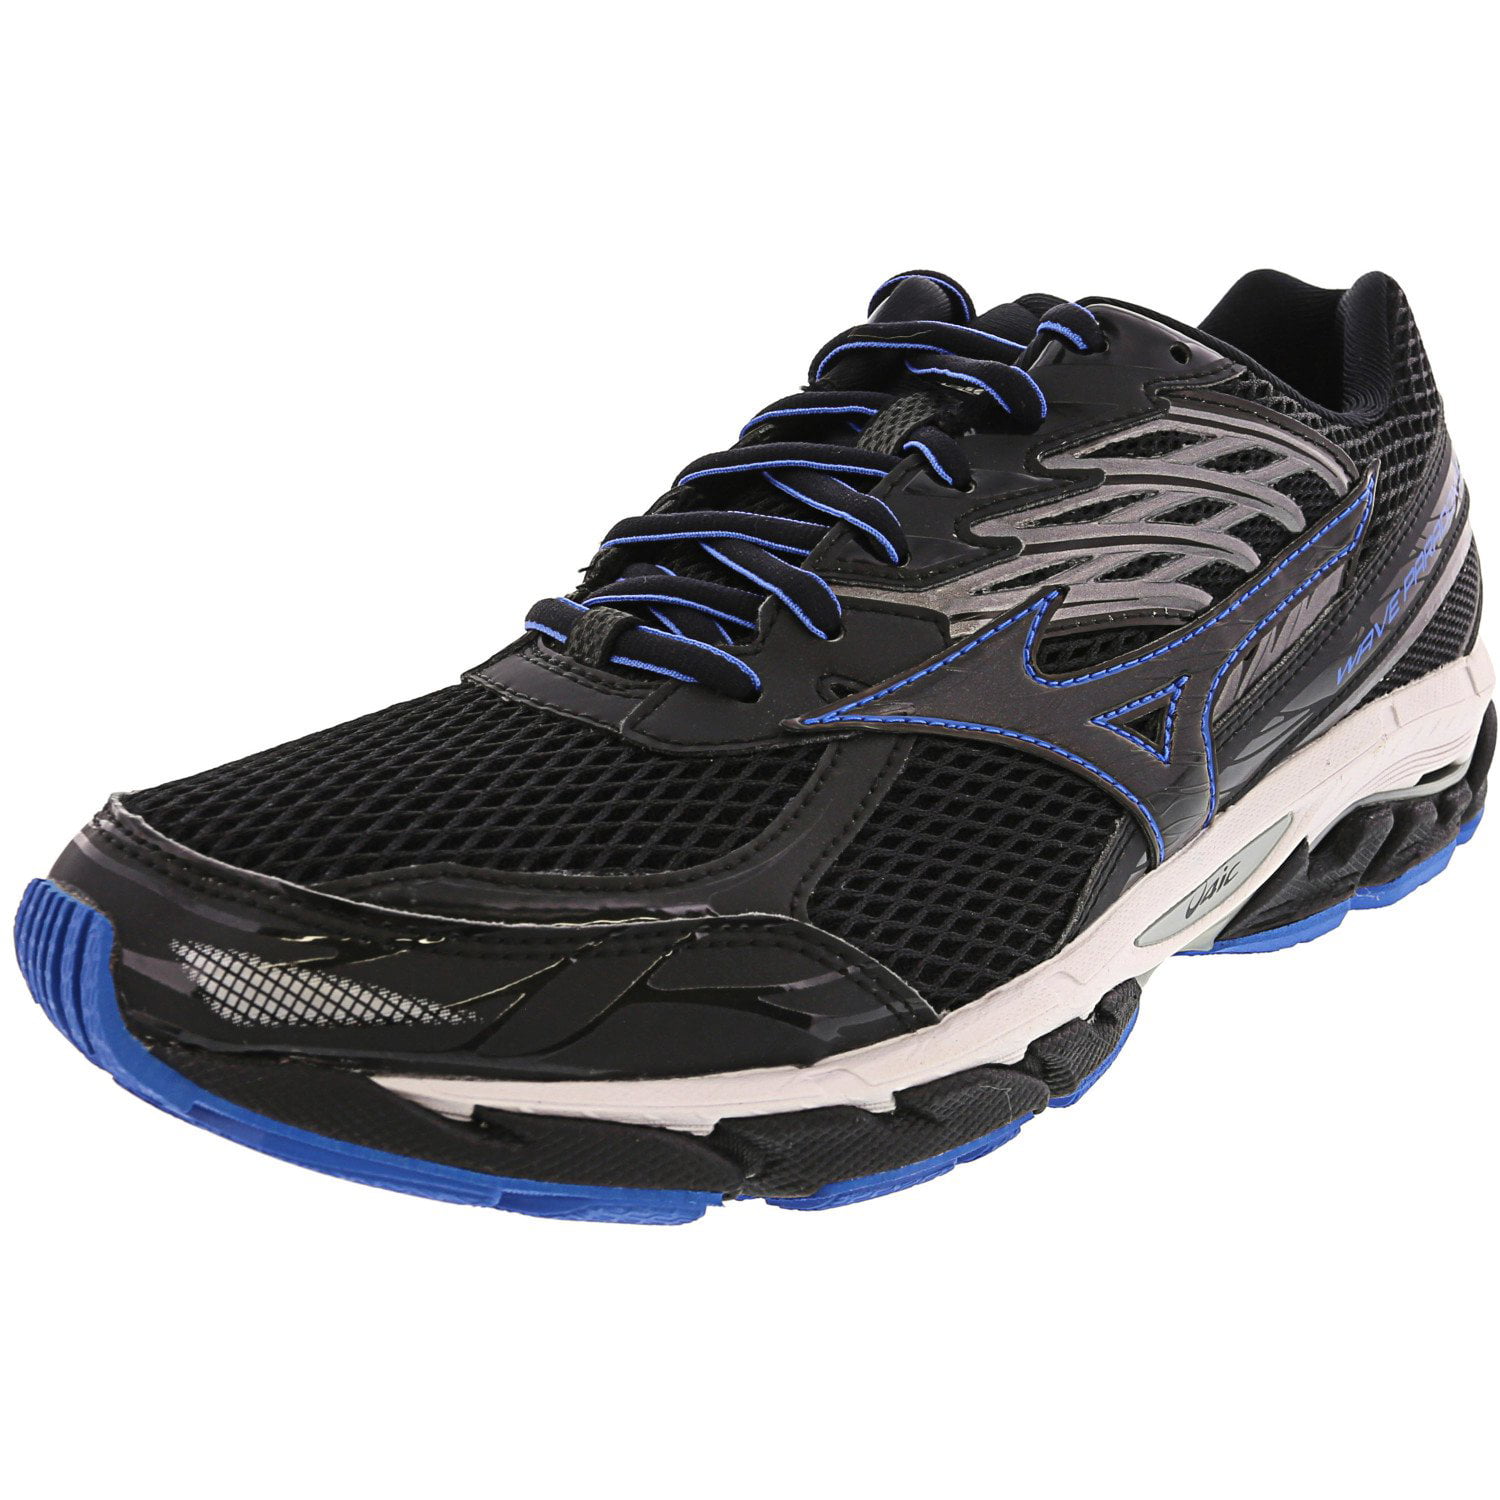 Blue Ankle-High Fabric Running Shoe 